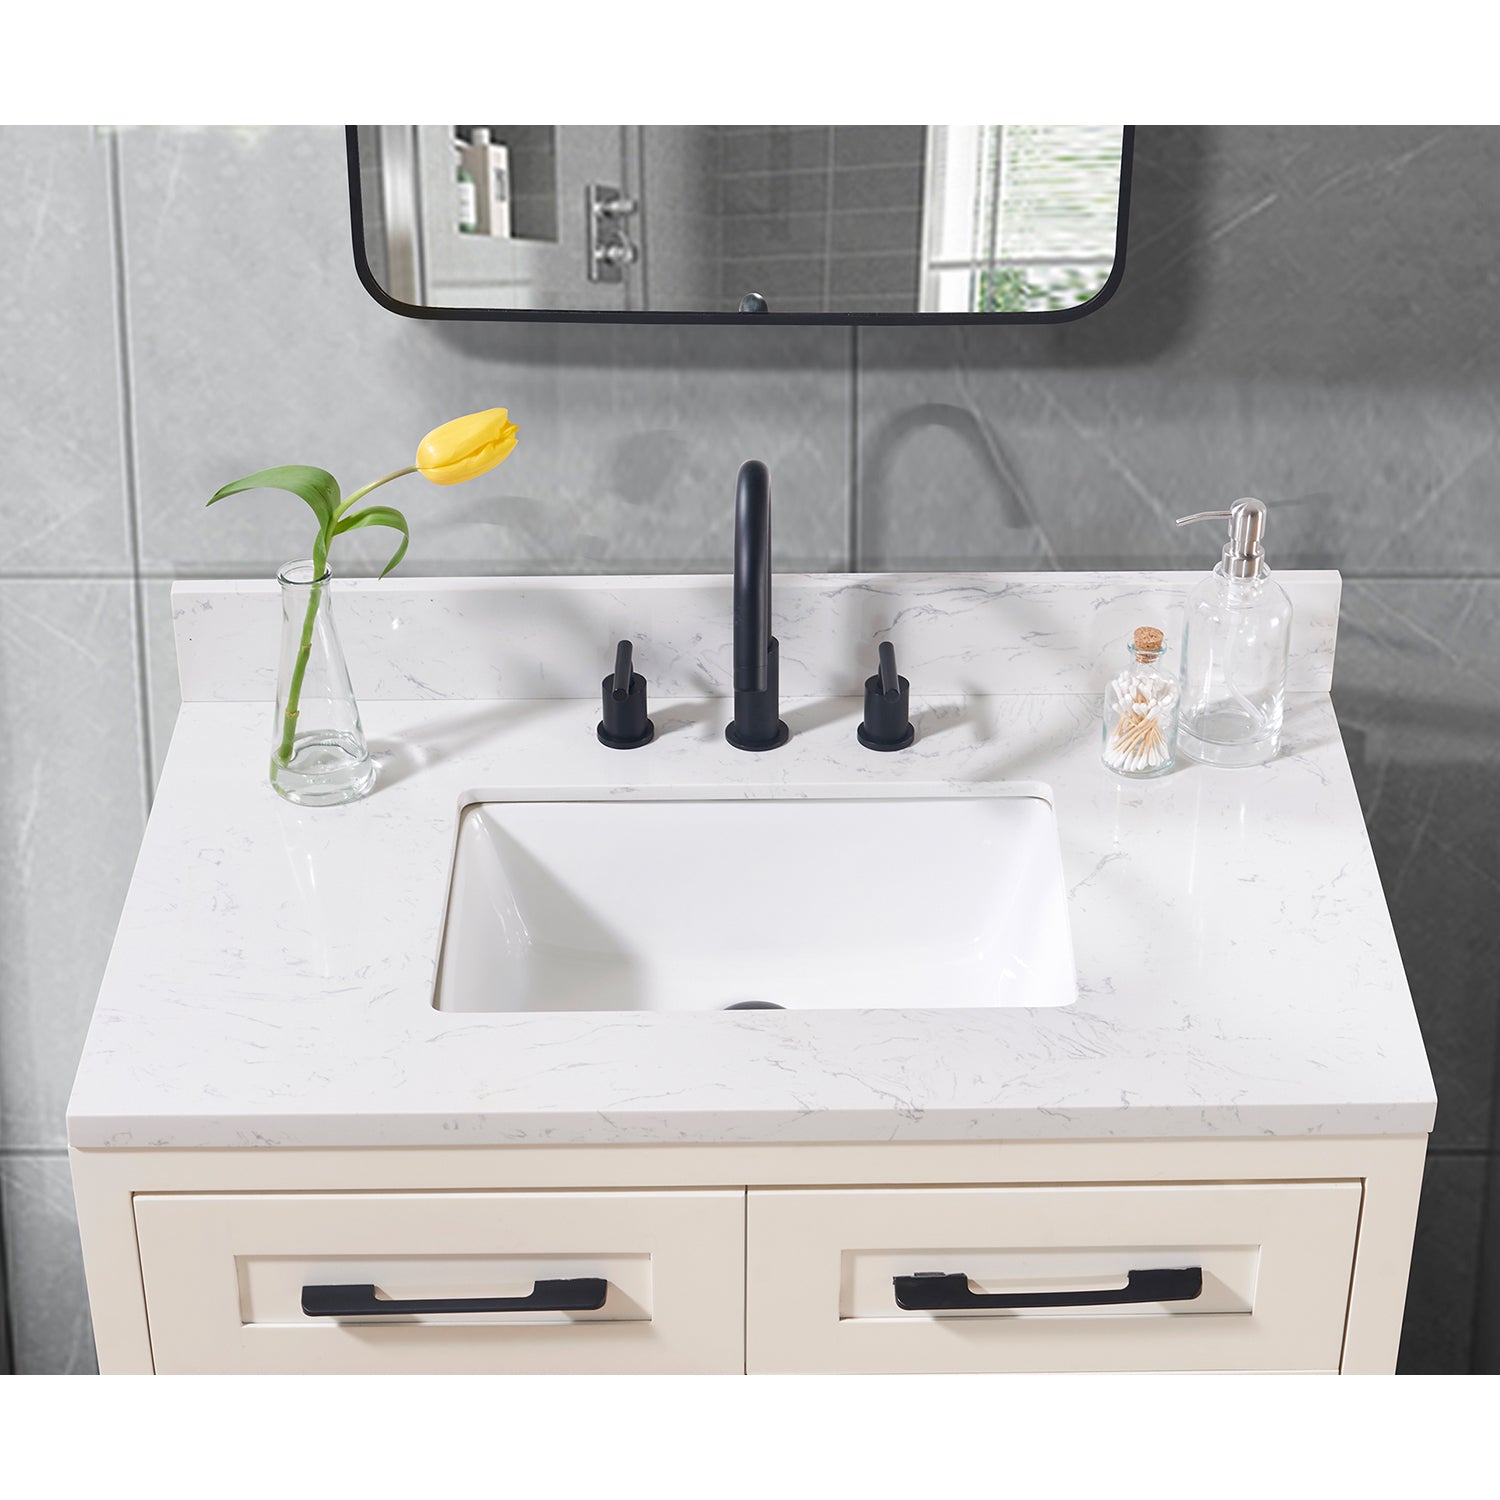 Oderzo Stone effects Single Sink Vanity Top in Aosta White with White Sink